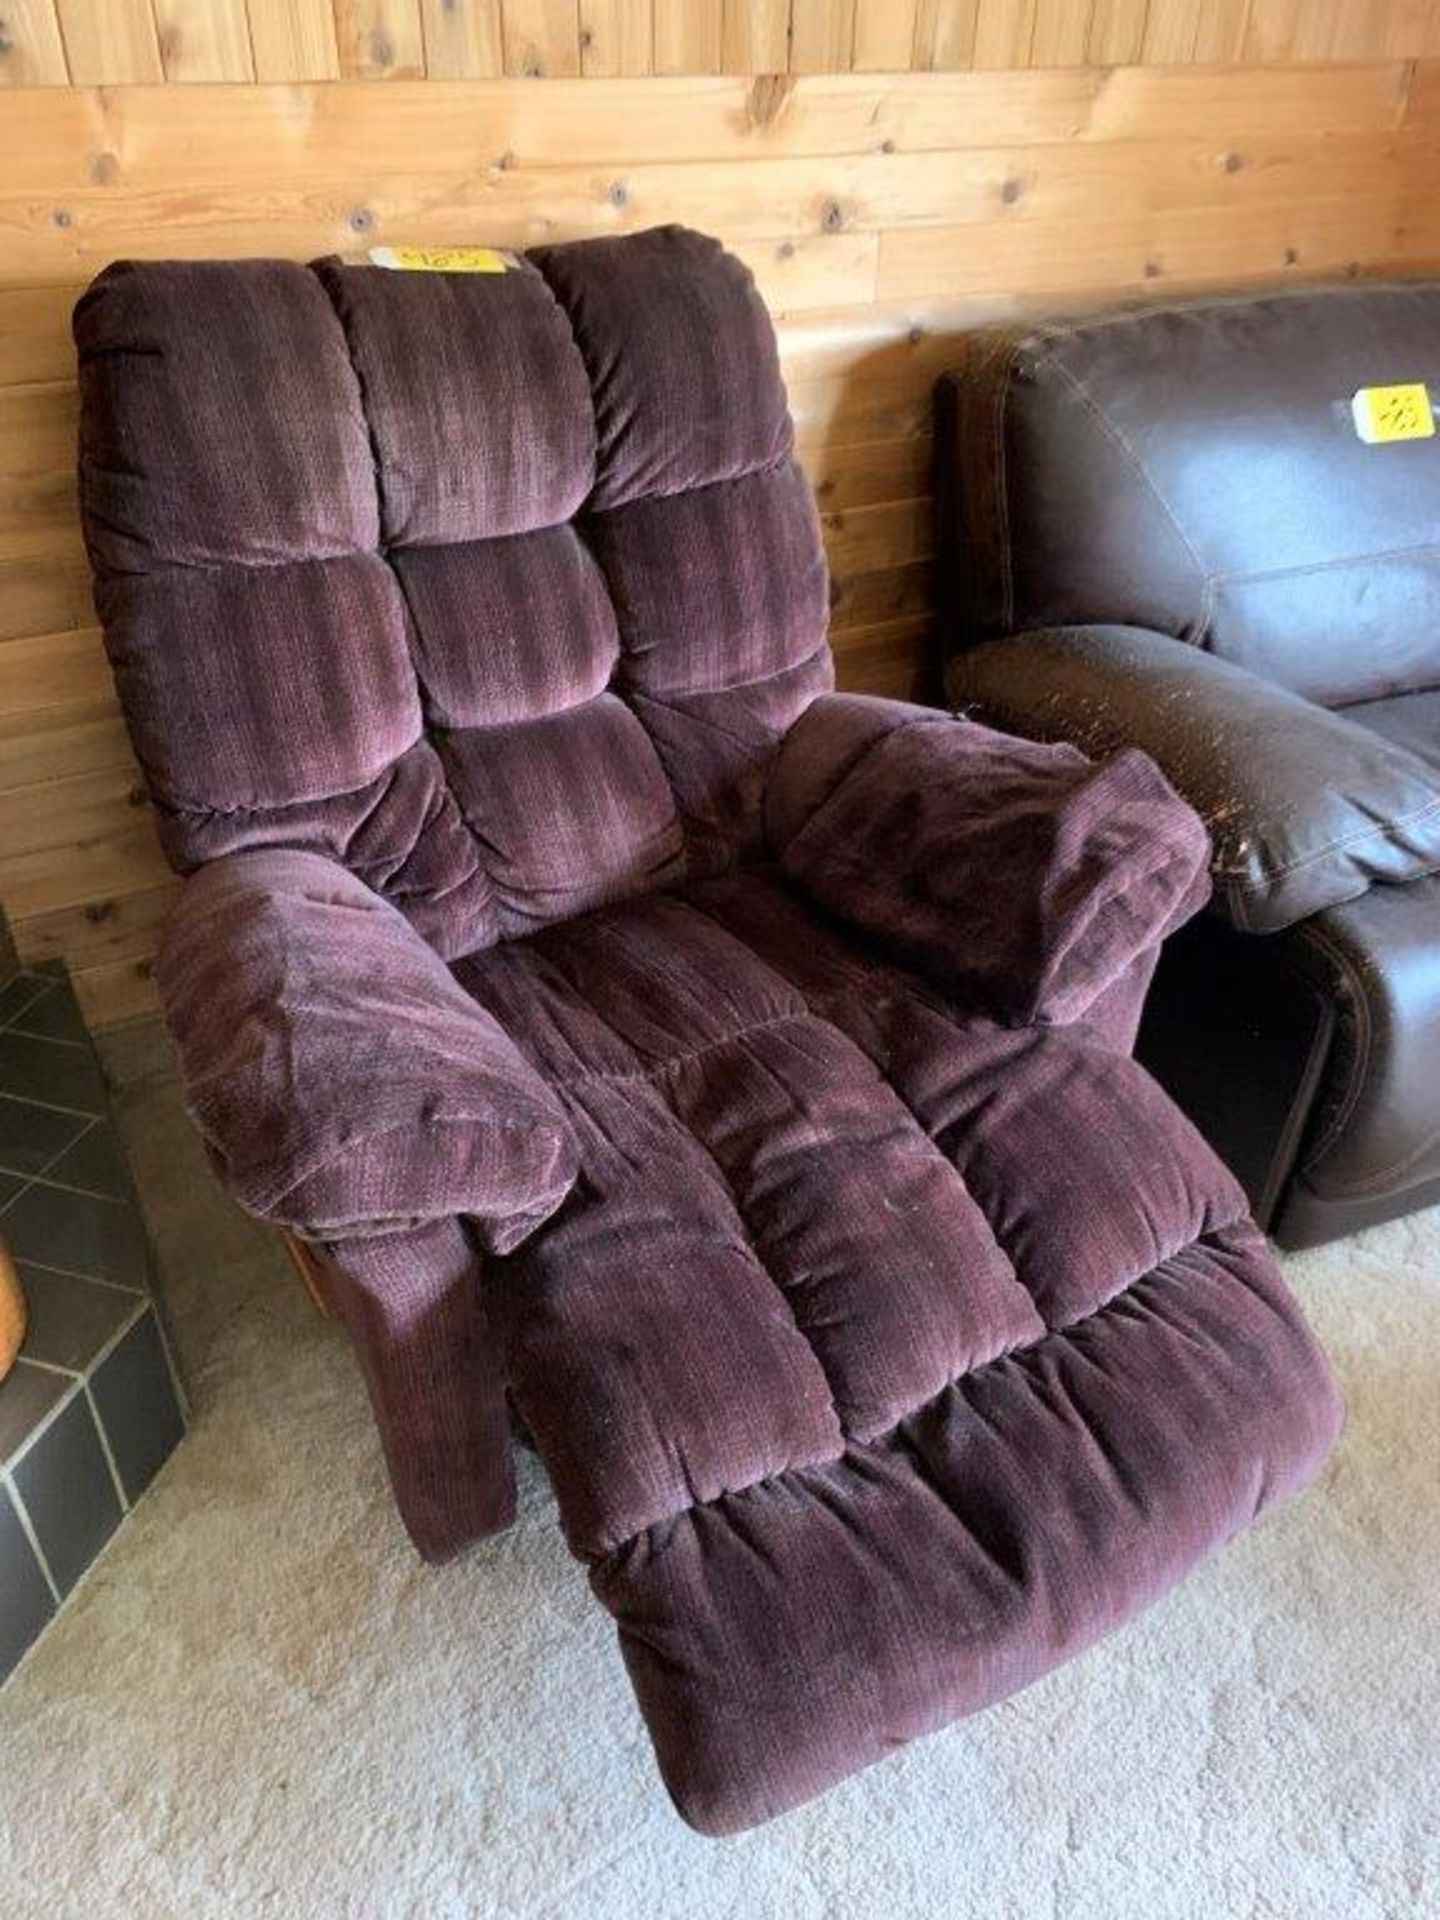 LEATHER SOFA AND CHAIR, 1-CLOTH RECLINER CHAIR - Image 4 of 4